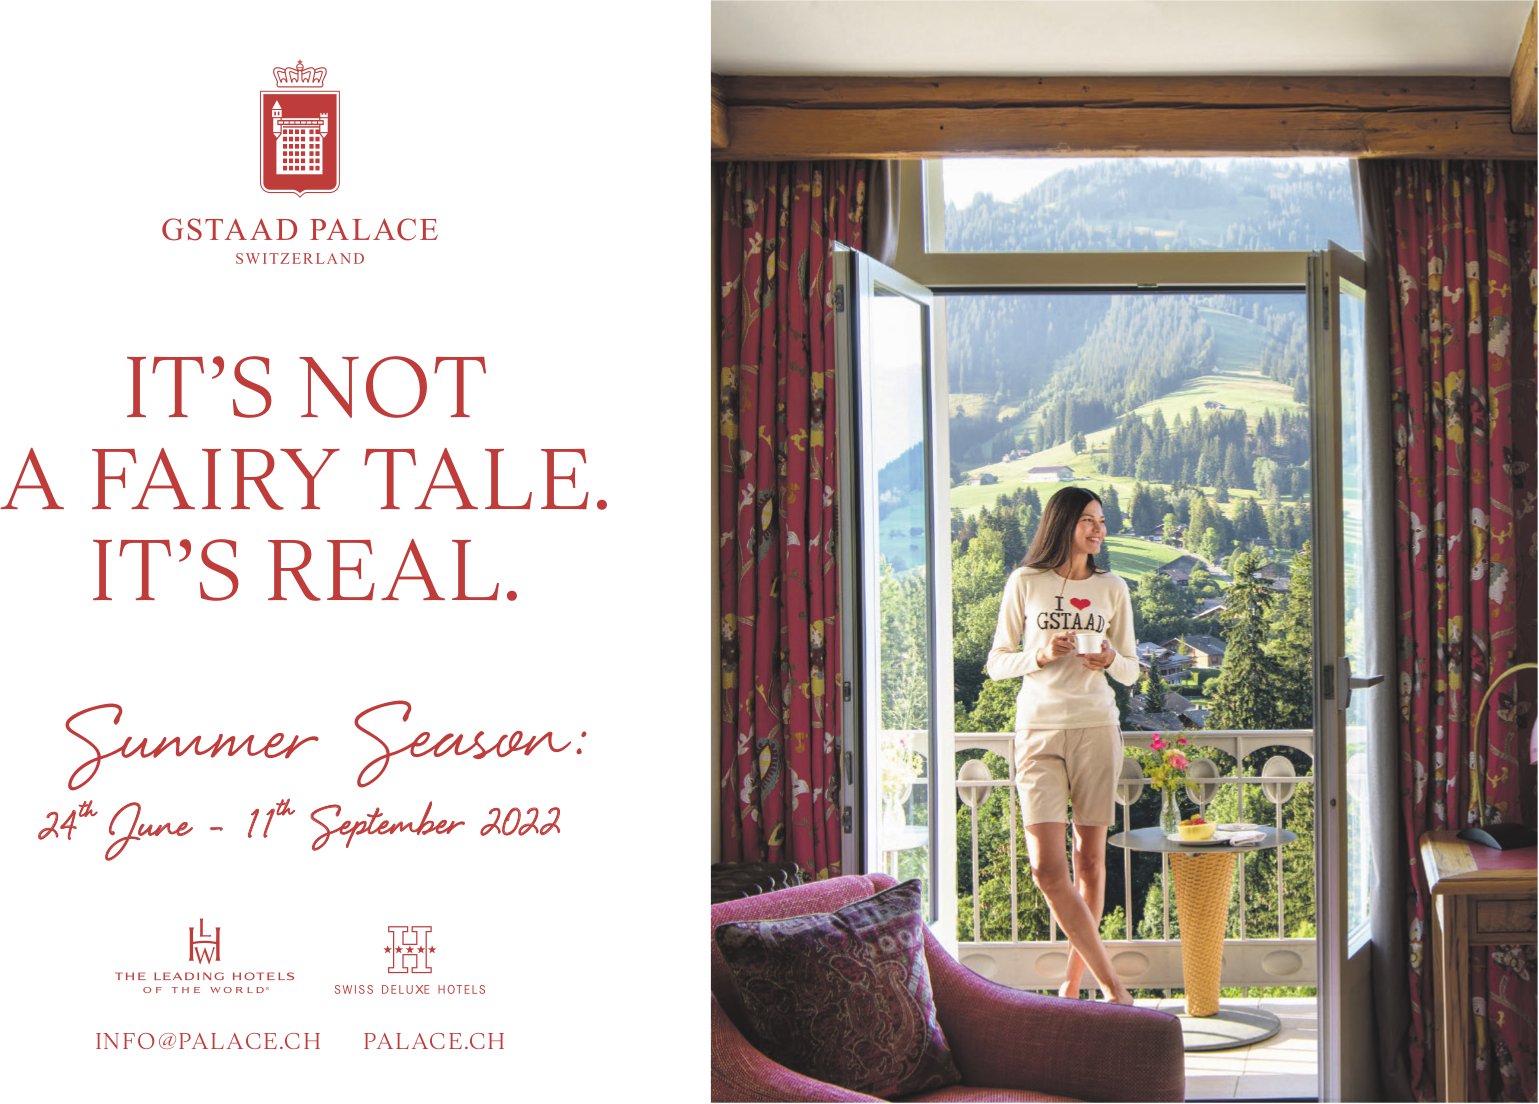 Gstaad Palace - It’s not a fairy tale. It’s real.